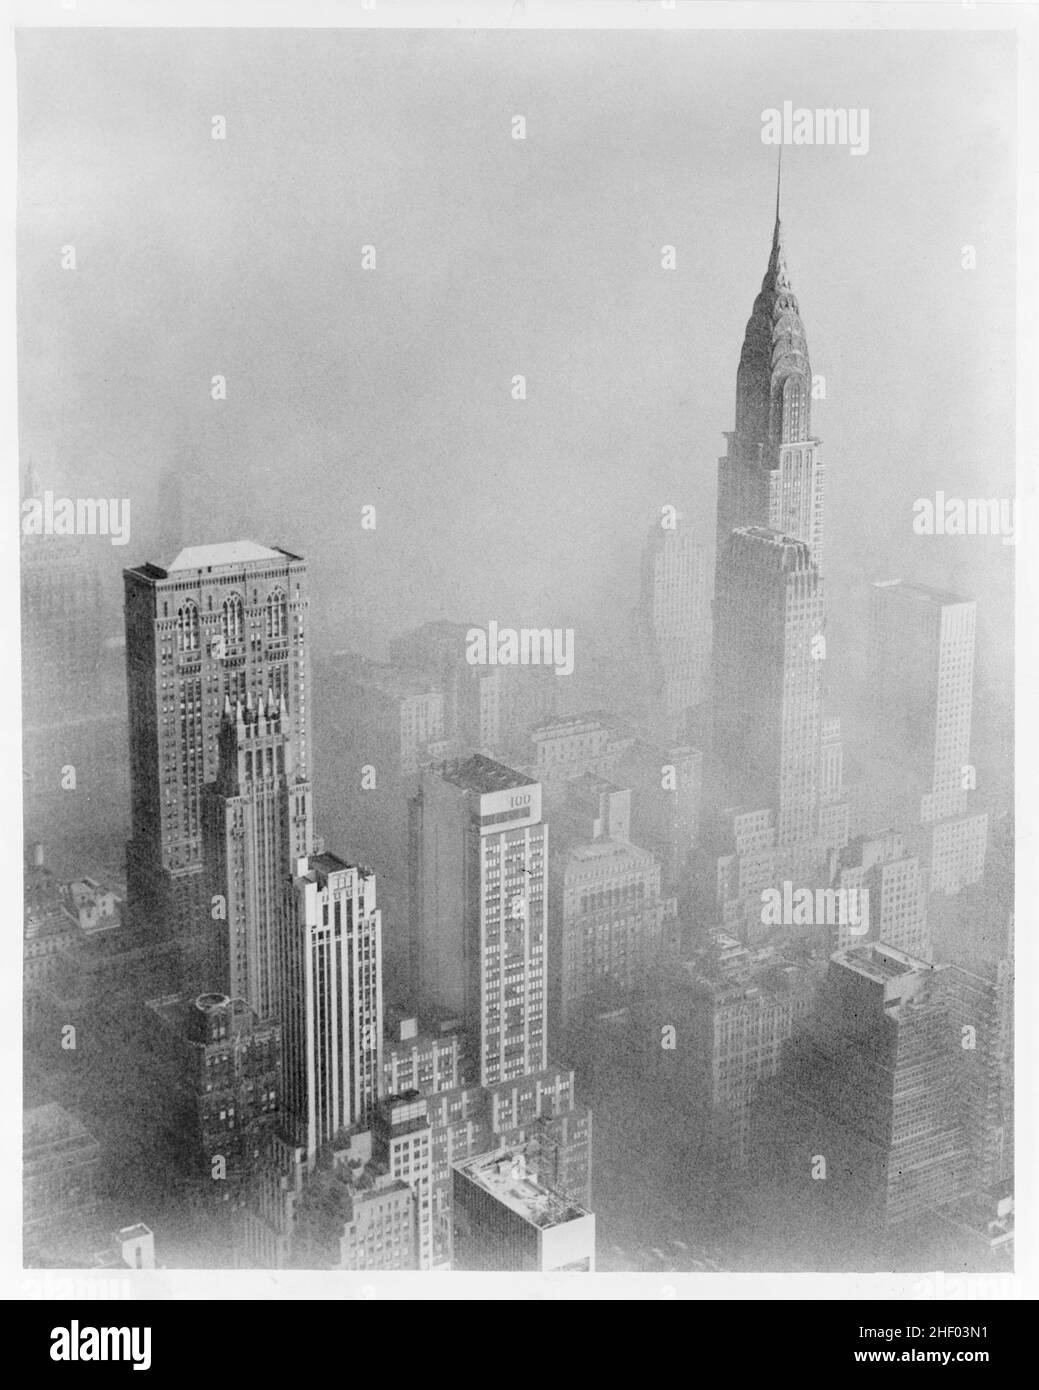 Smog obscures view of Chrysler Building from Empire State Building, New York City, 1953. Albertin, Walter, photographer. Vintage. Stock Photo